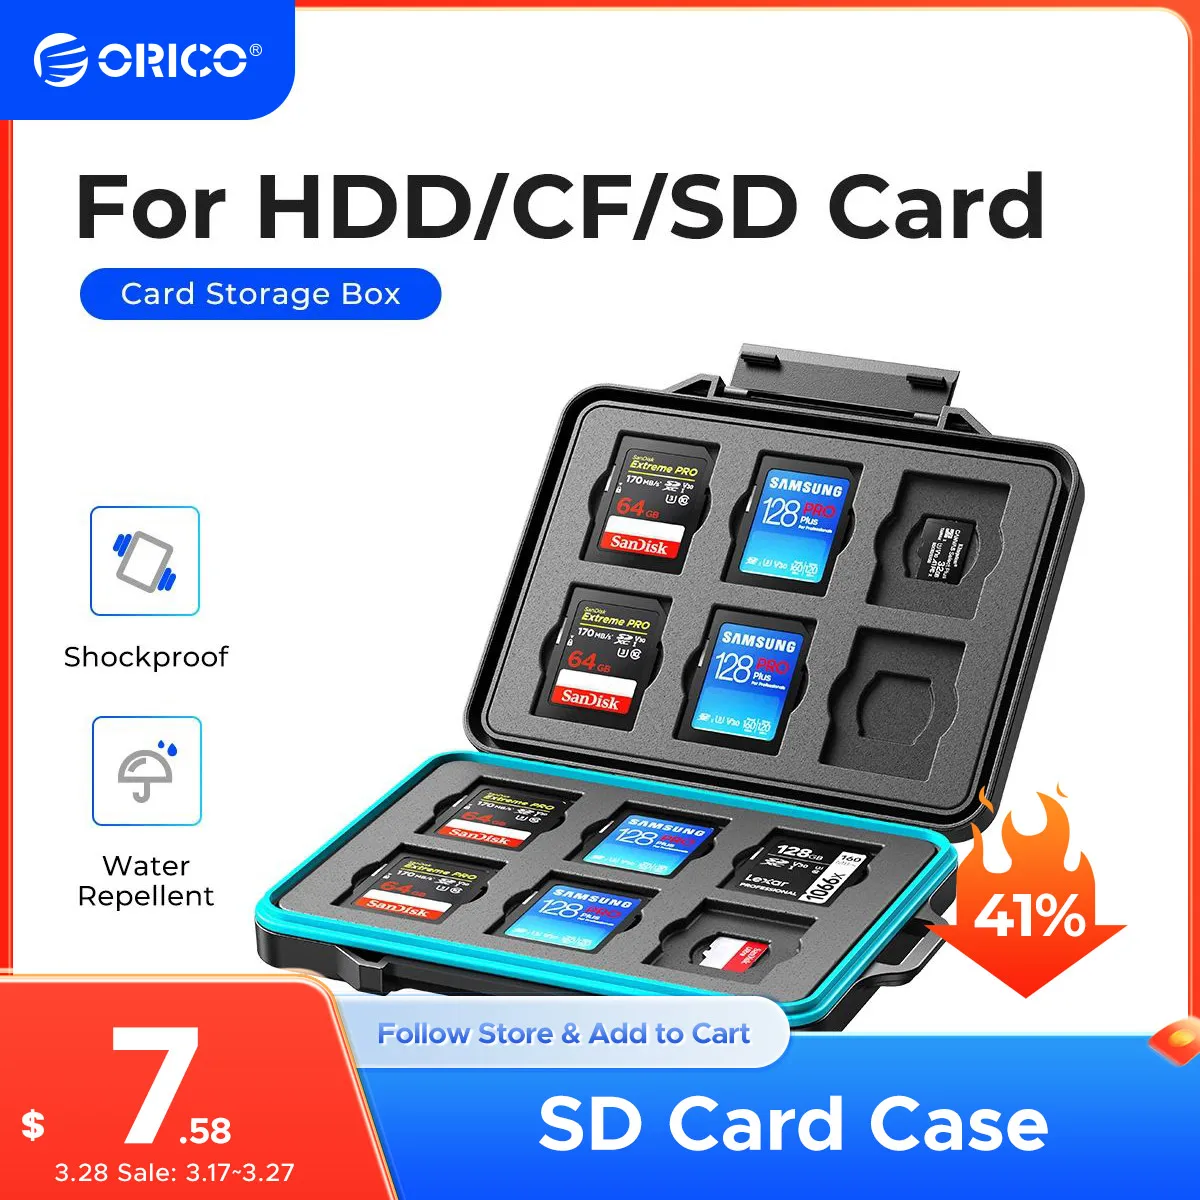 ORICO 12 Slots SD Card 12 Slots TF Card Waterproof Memory SD Card Case for Computer Camera Cards Storage Organizer Anti-static jjc 36 slots sd card memory card case wallet holder for 24 tf micro sd msd tf 12 sd sdxc sdhc card organizer storage box keeper